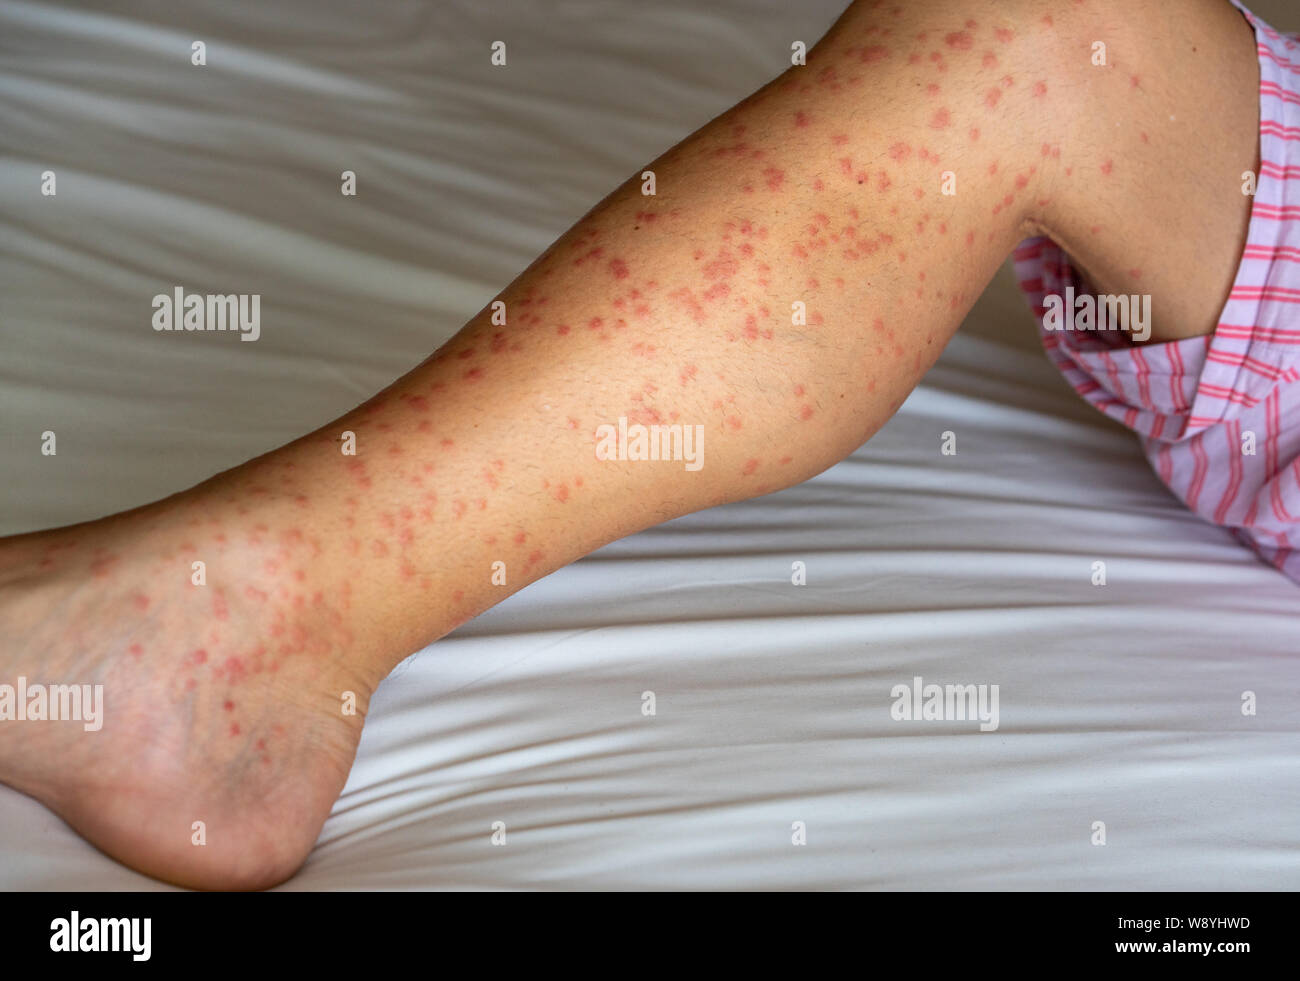 Close up of redness, itching and swelling after many mosquitos bite on the leg - allergy to mosquito saliva can cause papular hives or Skeeter's syndr Stock Photo